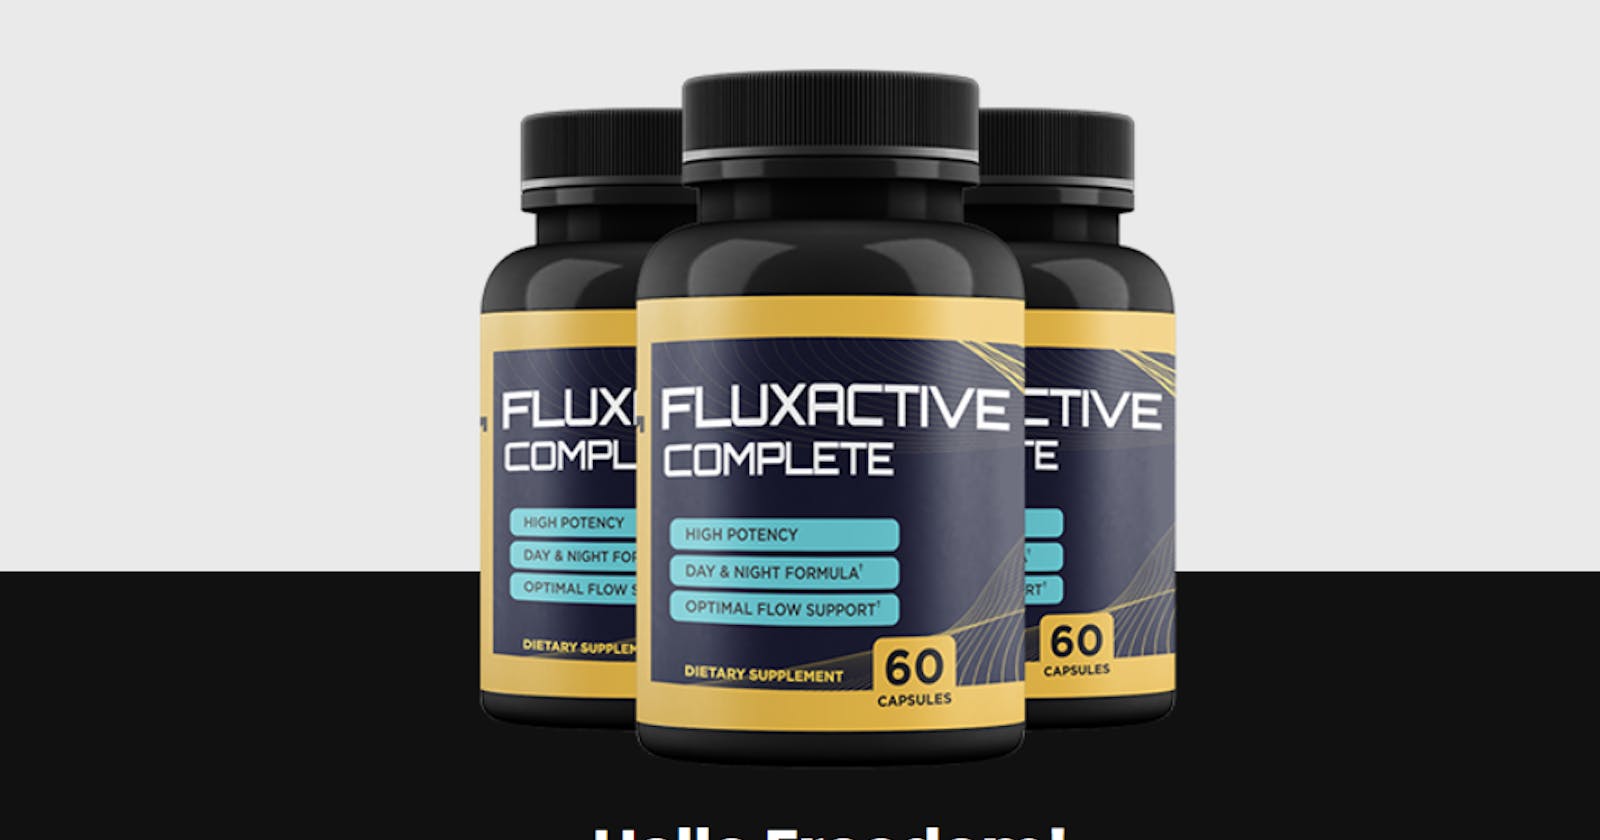 Fluxactive Complete Reviews- Is Flux Active Complete Supplement Clinically Tested Or Fake Ingredients? Check 3 Pack Bottles Price And Discount Coupon!